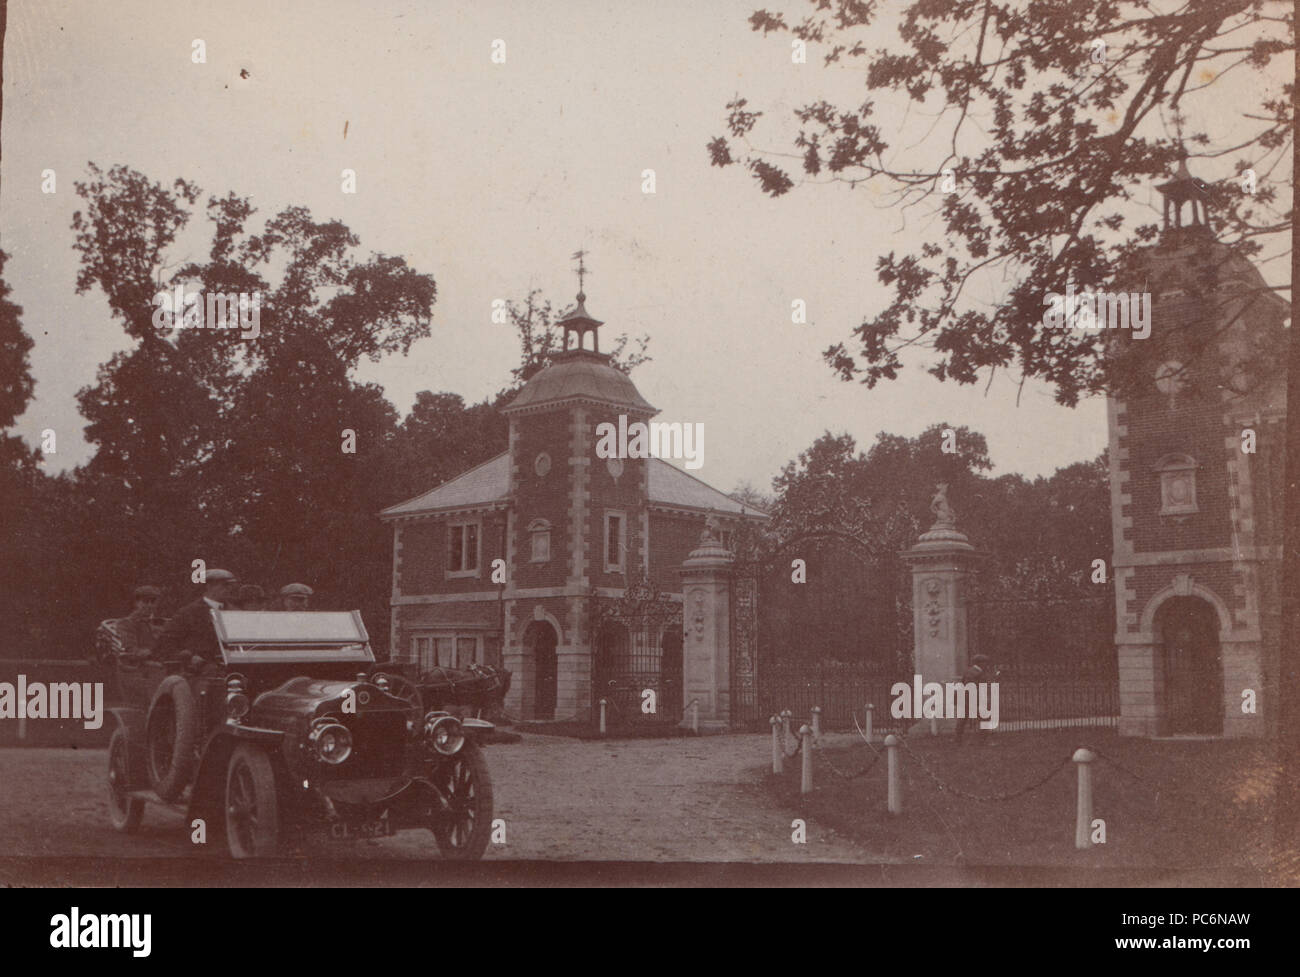 Vintage Photograph of a Vintage Motor Car Outside The Entrance To a Grand House or Building Stock Photo